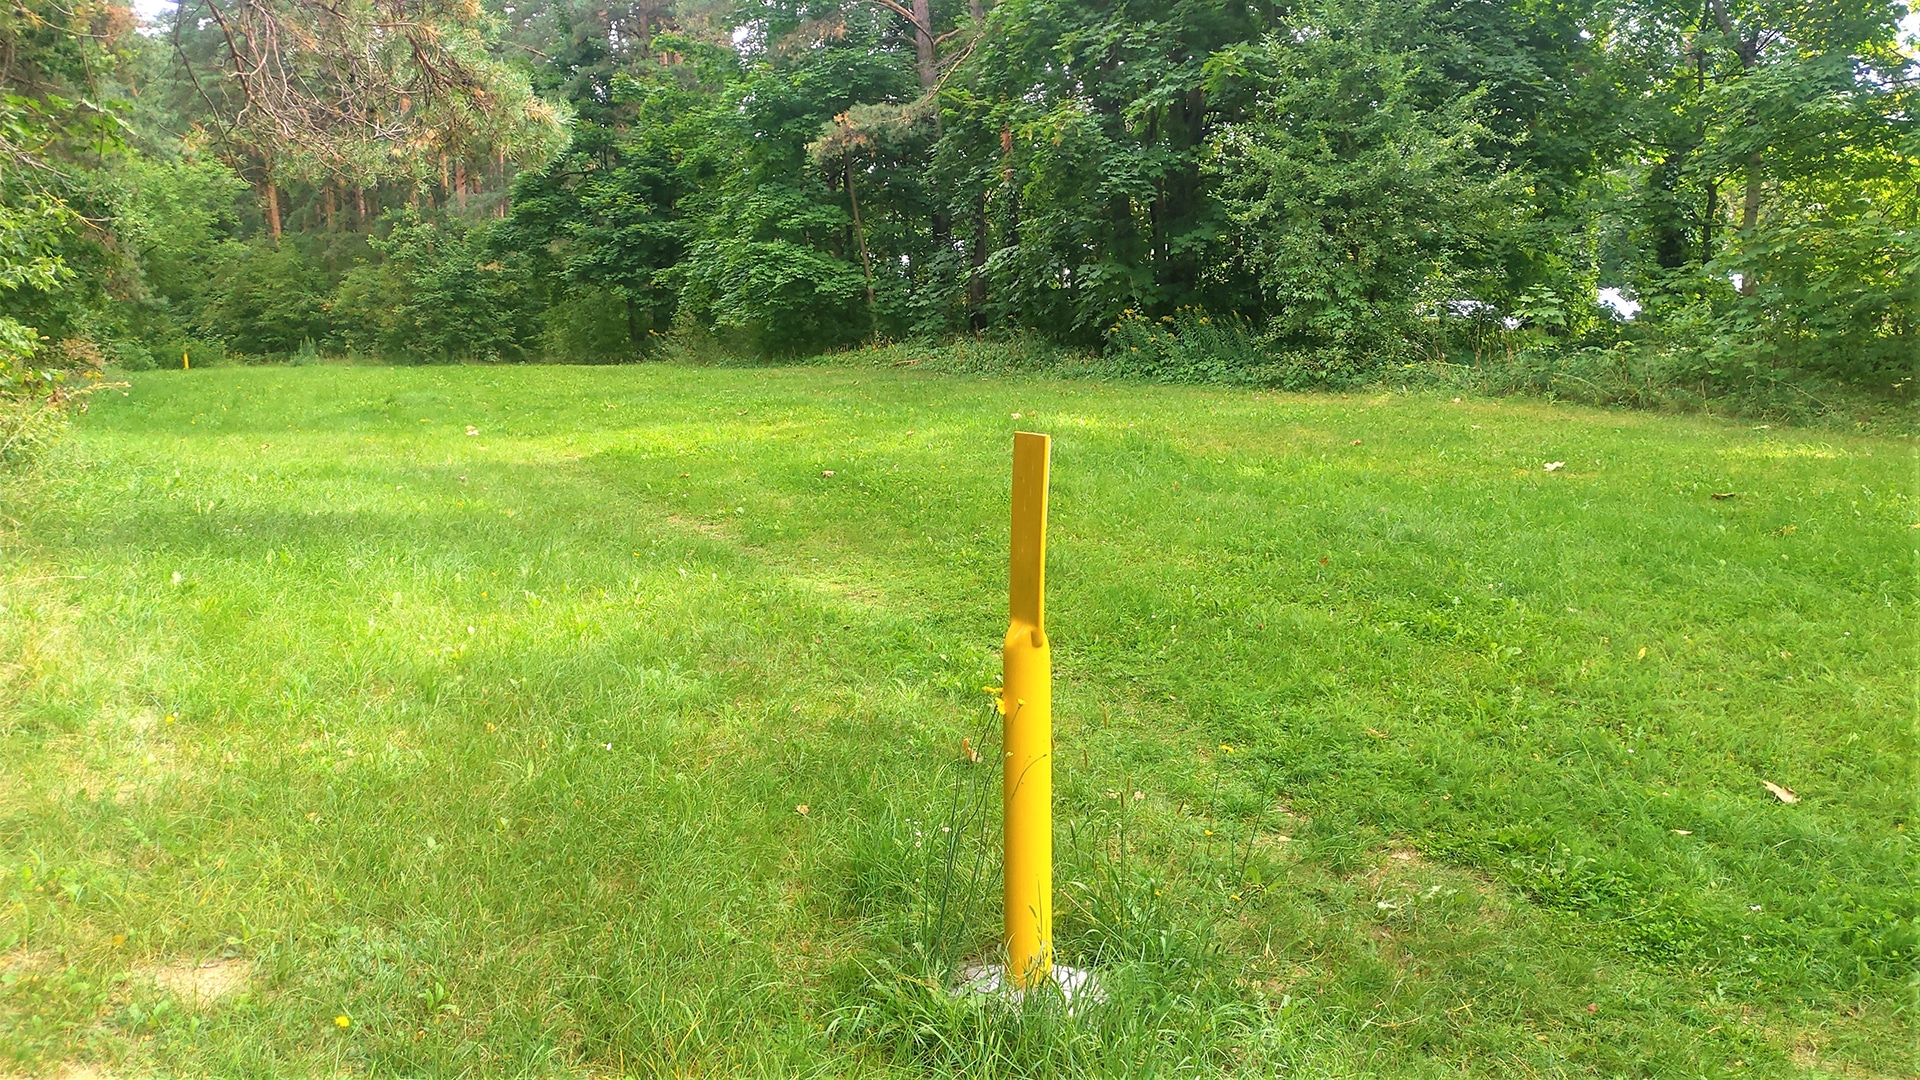 Underground pipeline right of way with yellow poles set up to mark the pipeline